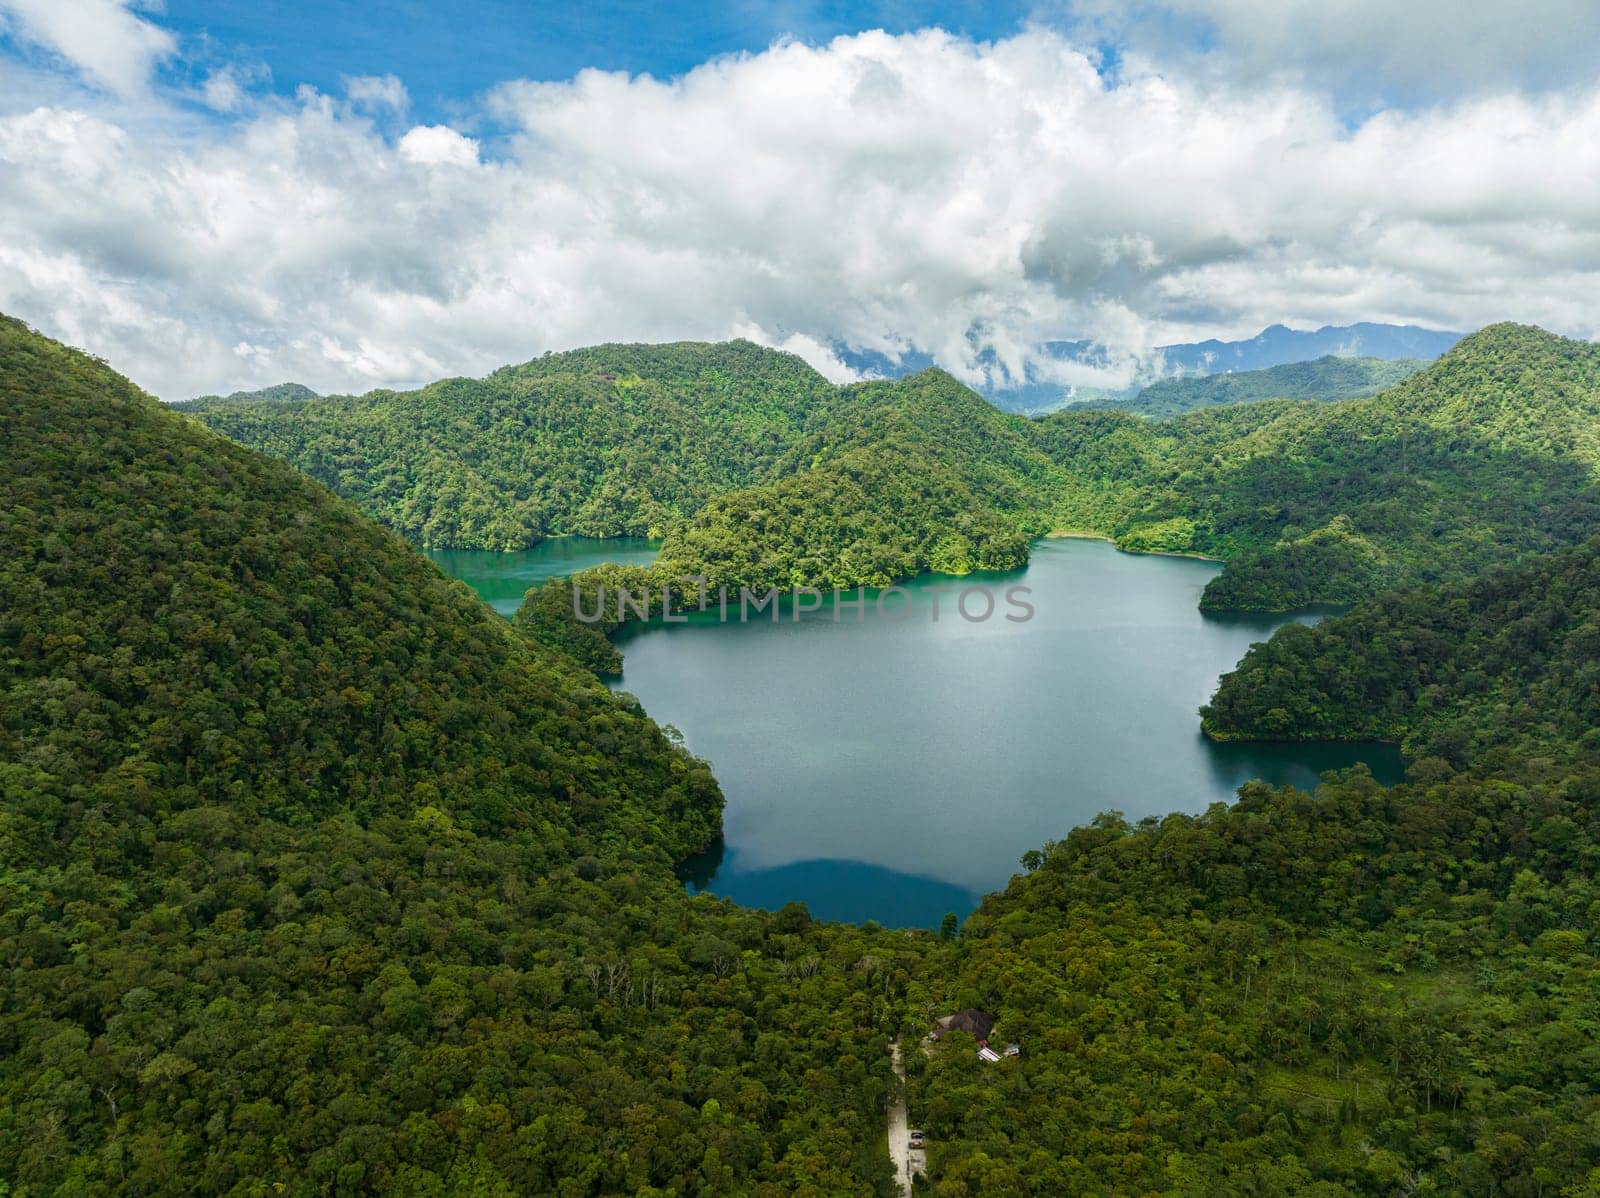 Lake in the mountains among tropical vegetation view from above. Balinsasayao Twin Lakes Natural Park. Negros, Philippines